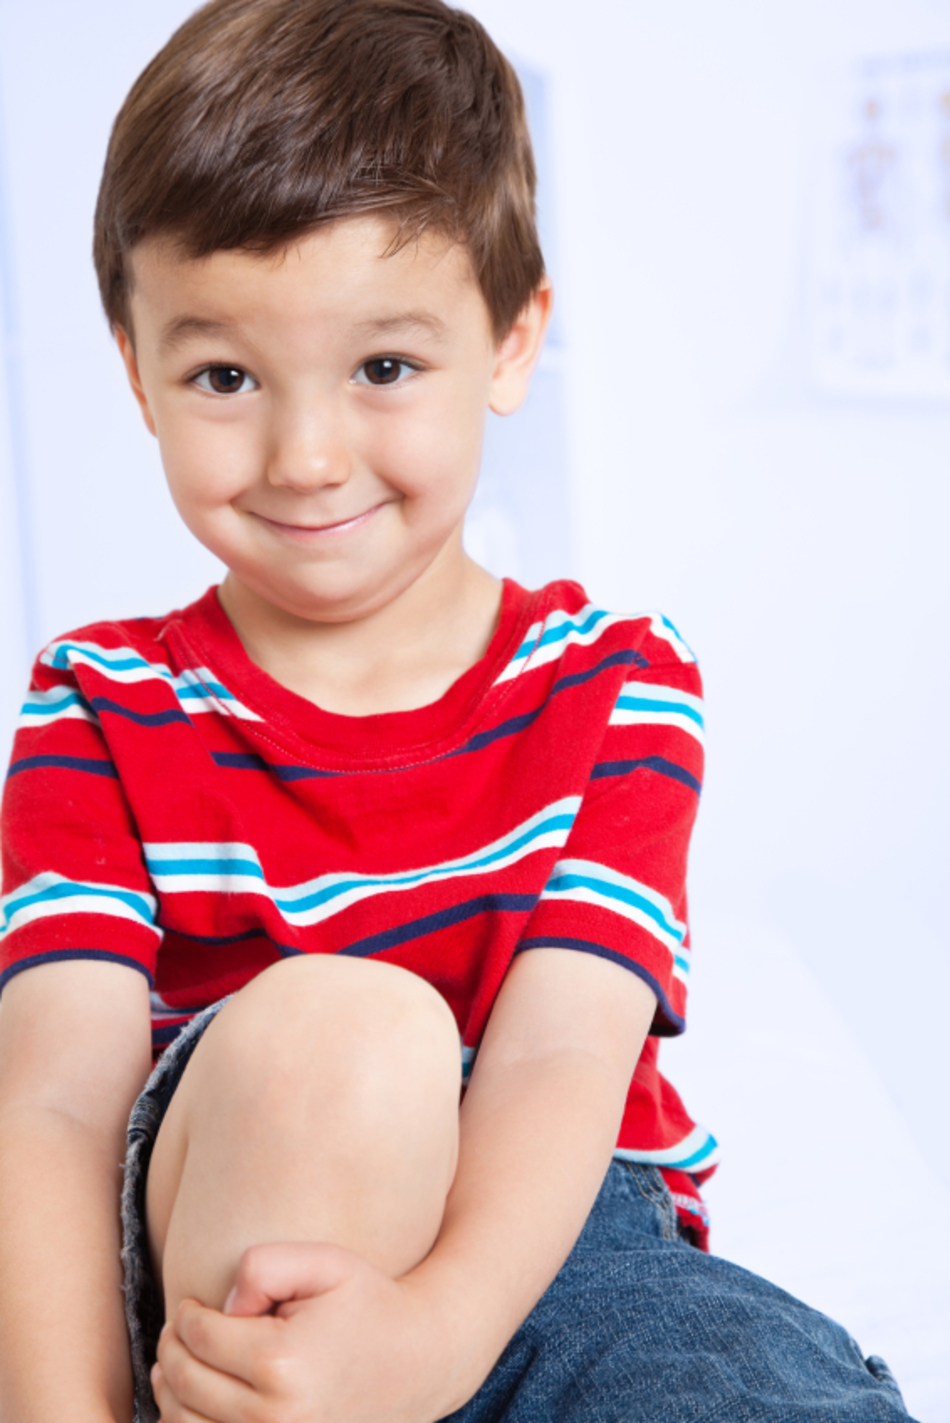 Restless Leg Syndrome or Something Different? Find Out What's Behind Your Child's Twitchy Legs